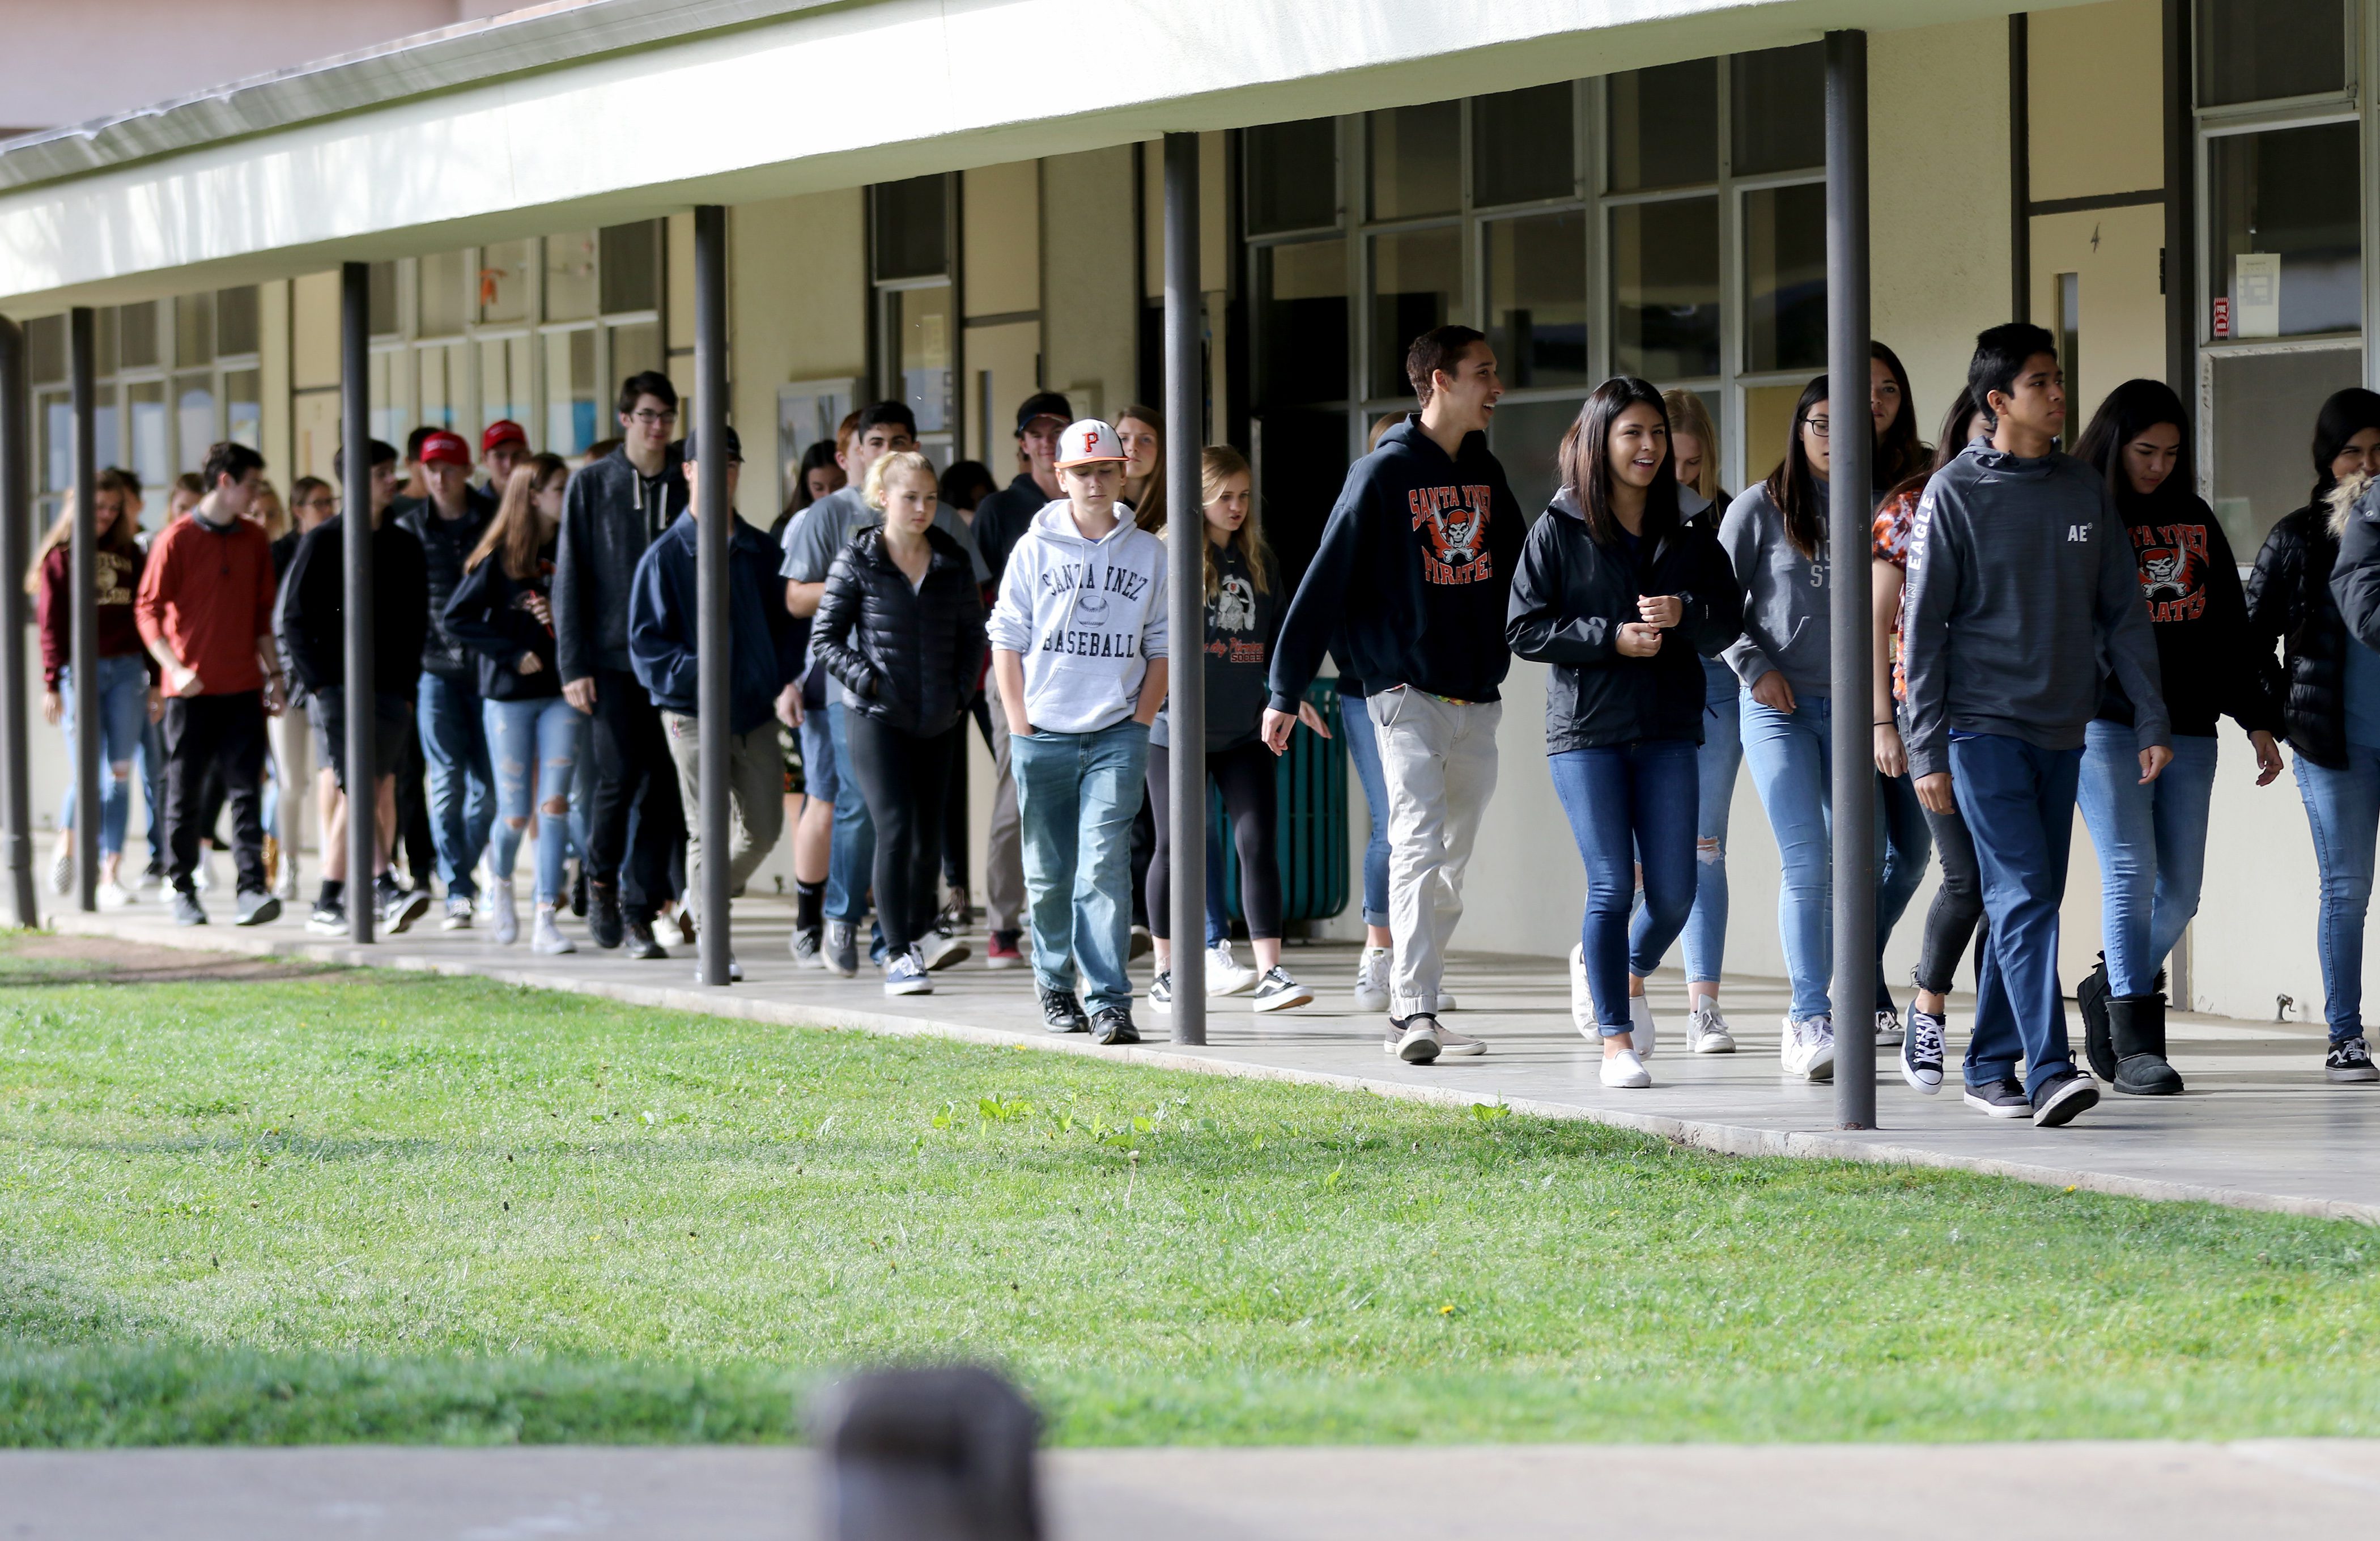 More than 200 SYHS students participate in national walk-out over gun violence, while others remain in the gym